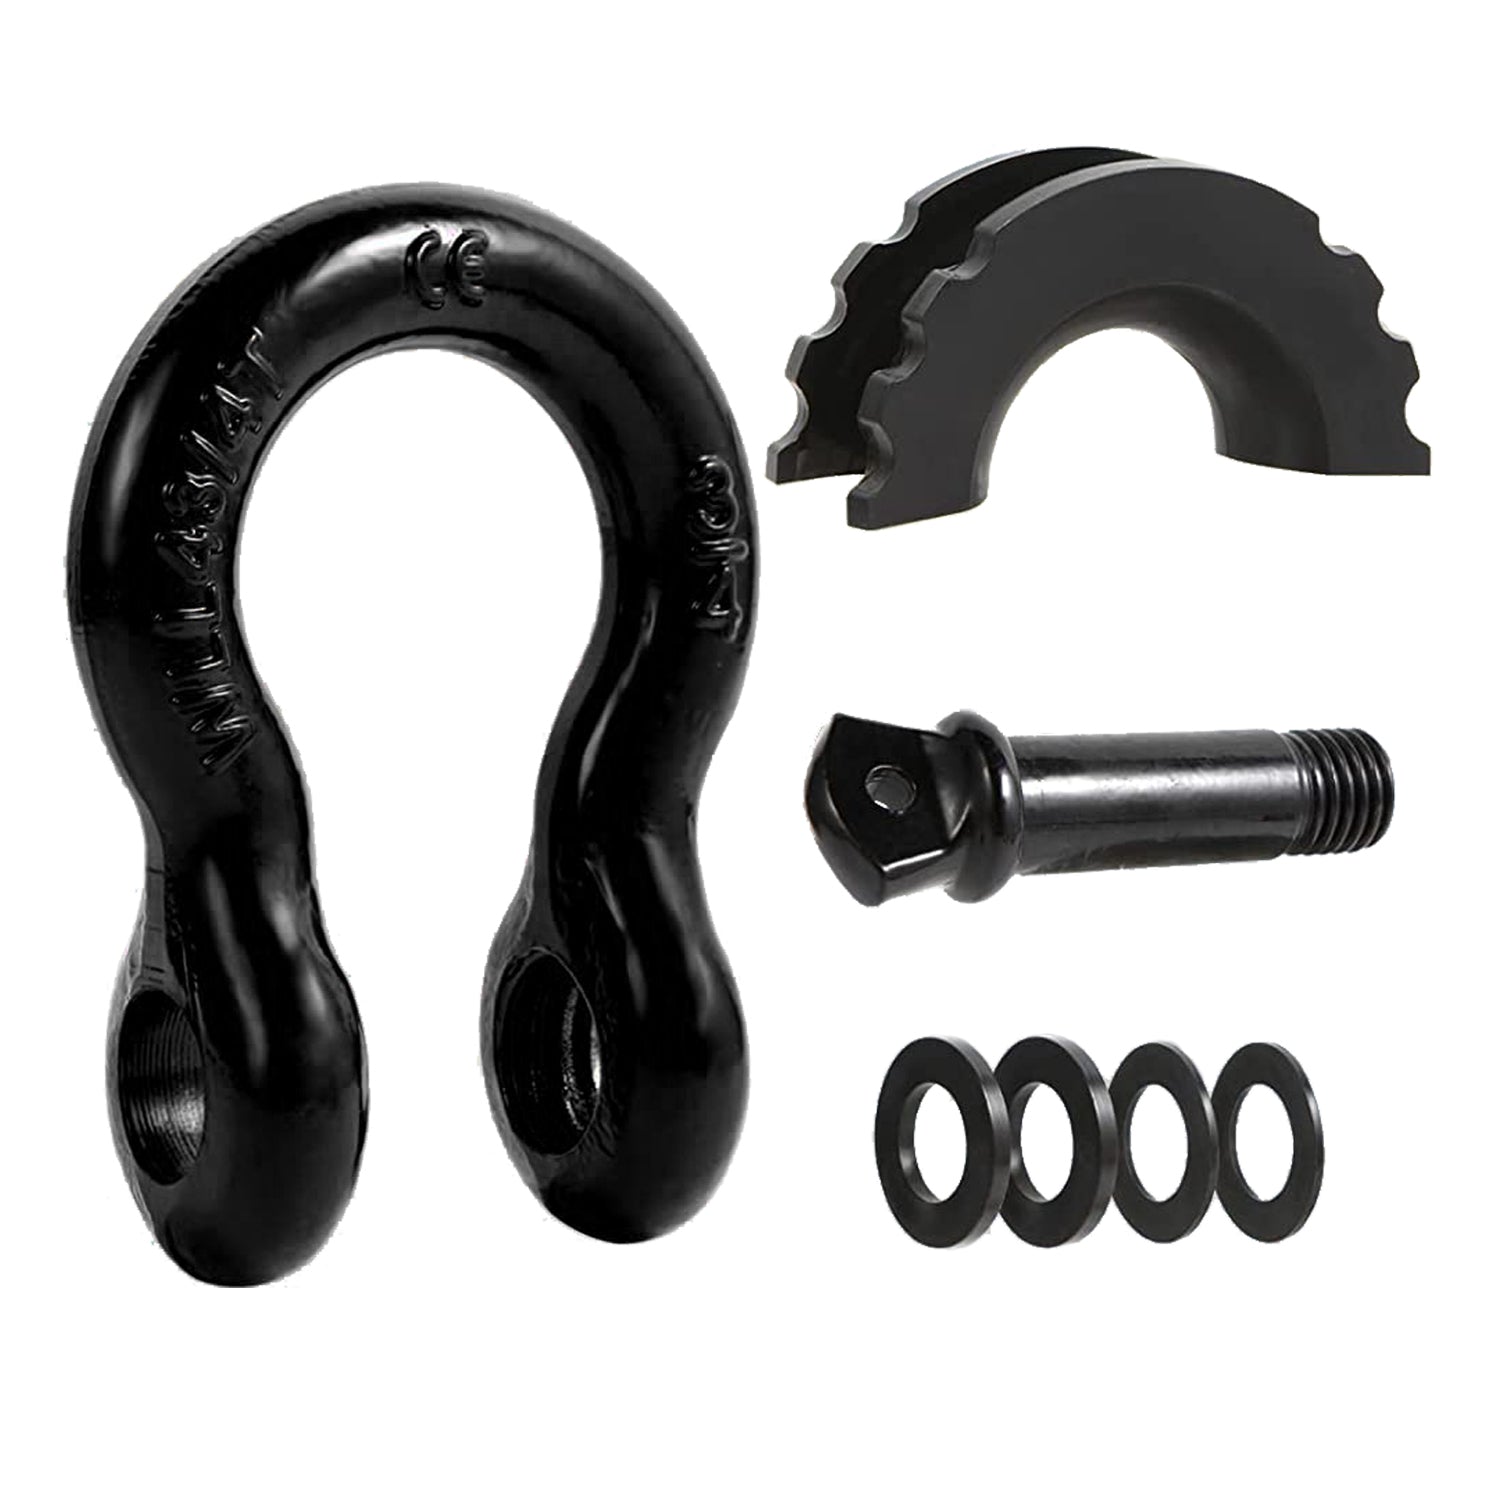 OPENROAD 3/4" D-Ring Shackle 4.75 Ton (9500 Lbs) Capacity with Isolators & Washer Kit for Jeep Truck Vehicle  openroad4wd.com   